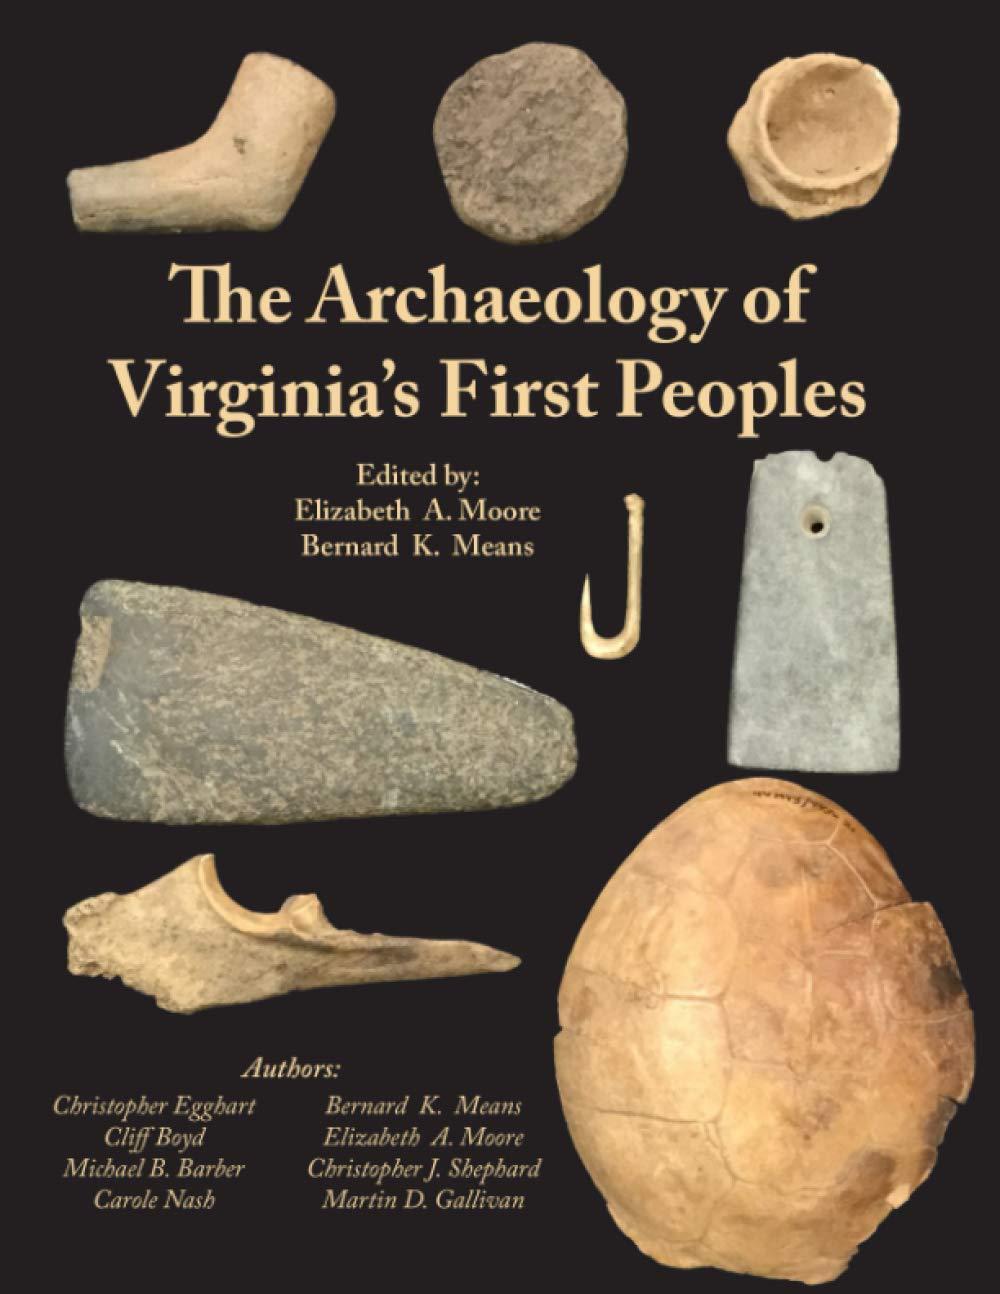 The book cover of “The Archaeology of Virginia’s First Peoples" with a listing of the editors and section authors.